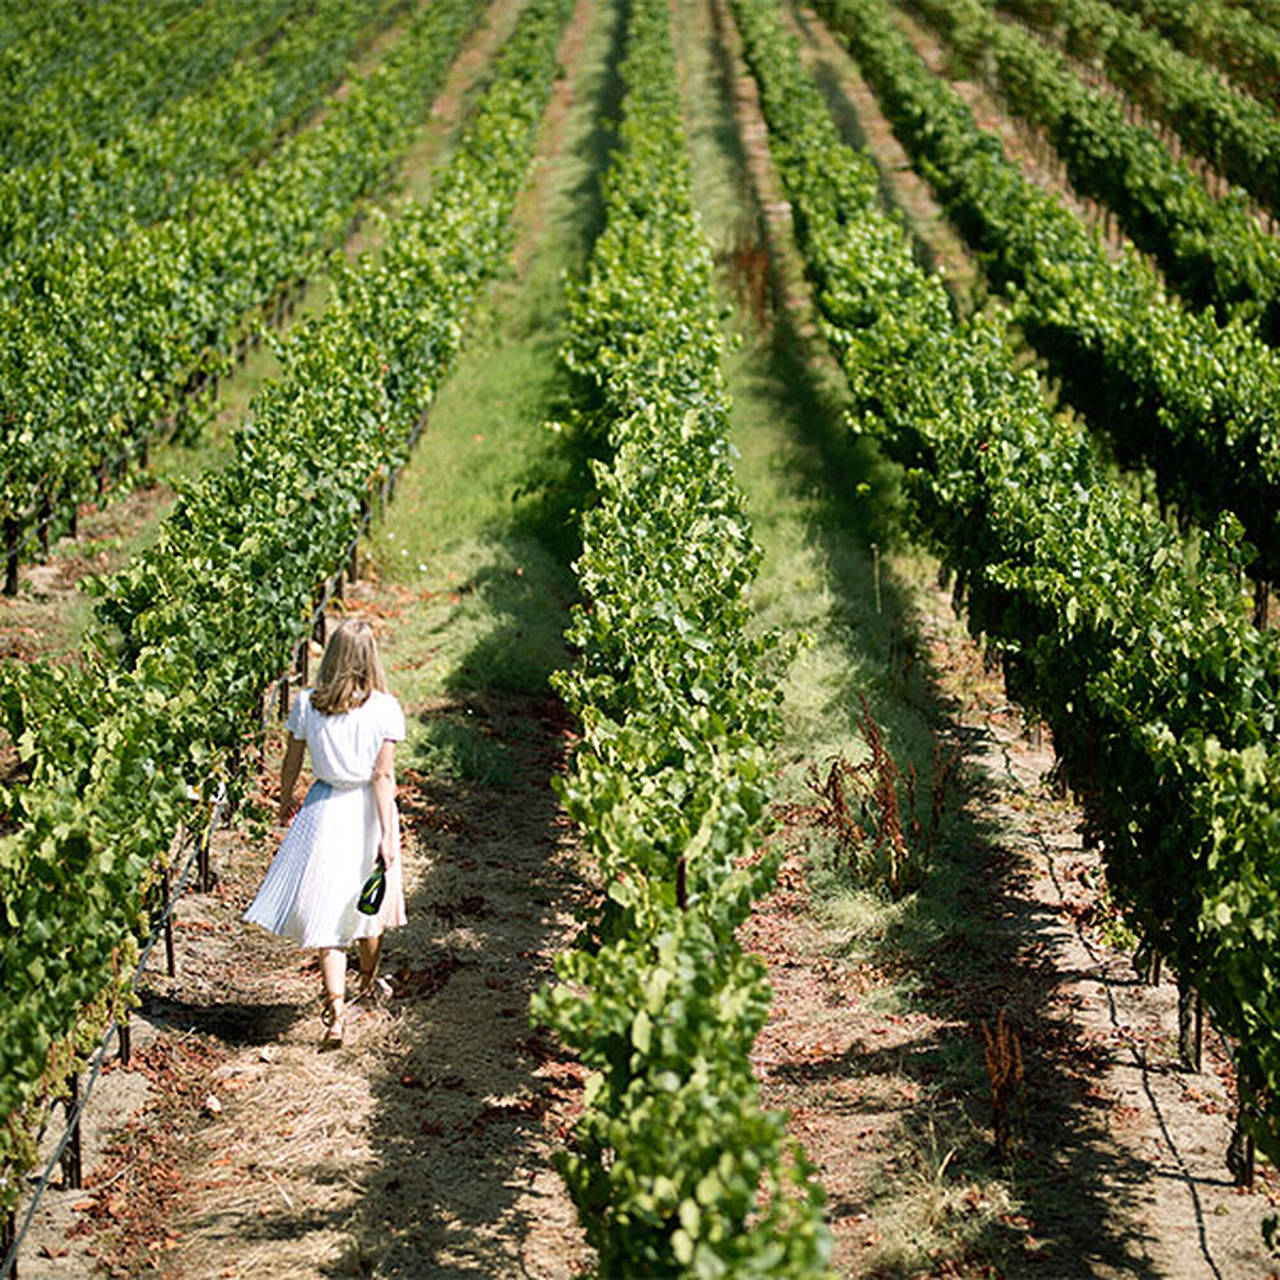 Ariel photo of a person dressed in white, holding a bottle of J Wine while walking through a vineyard.